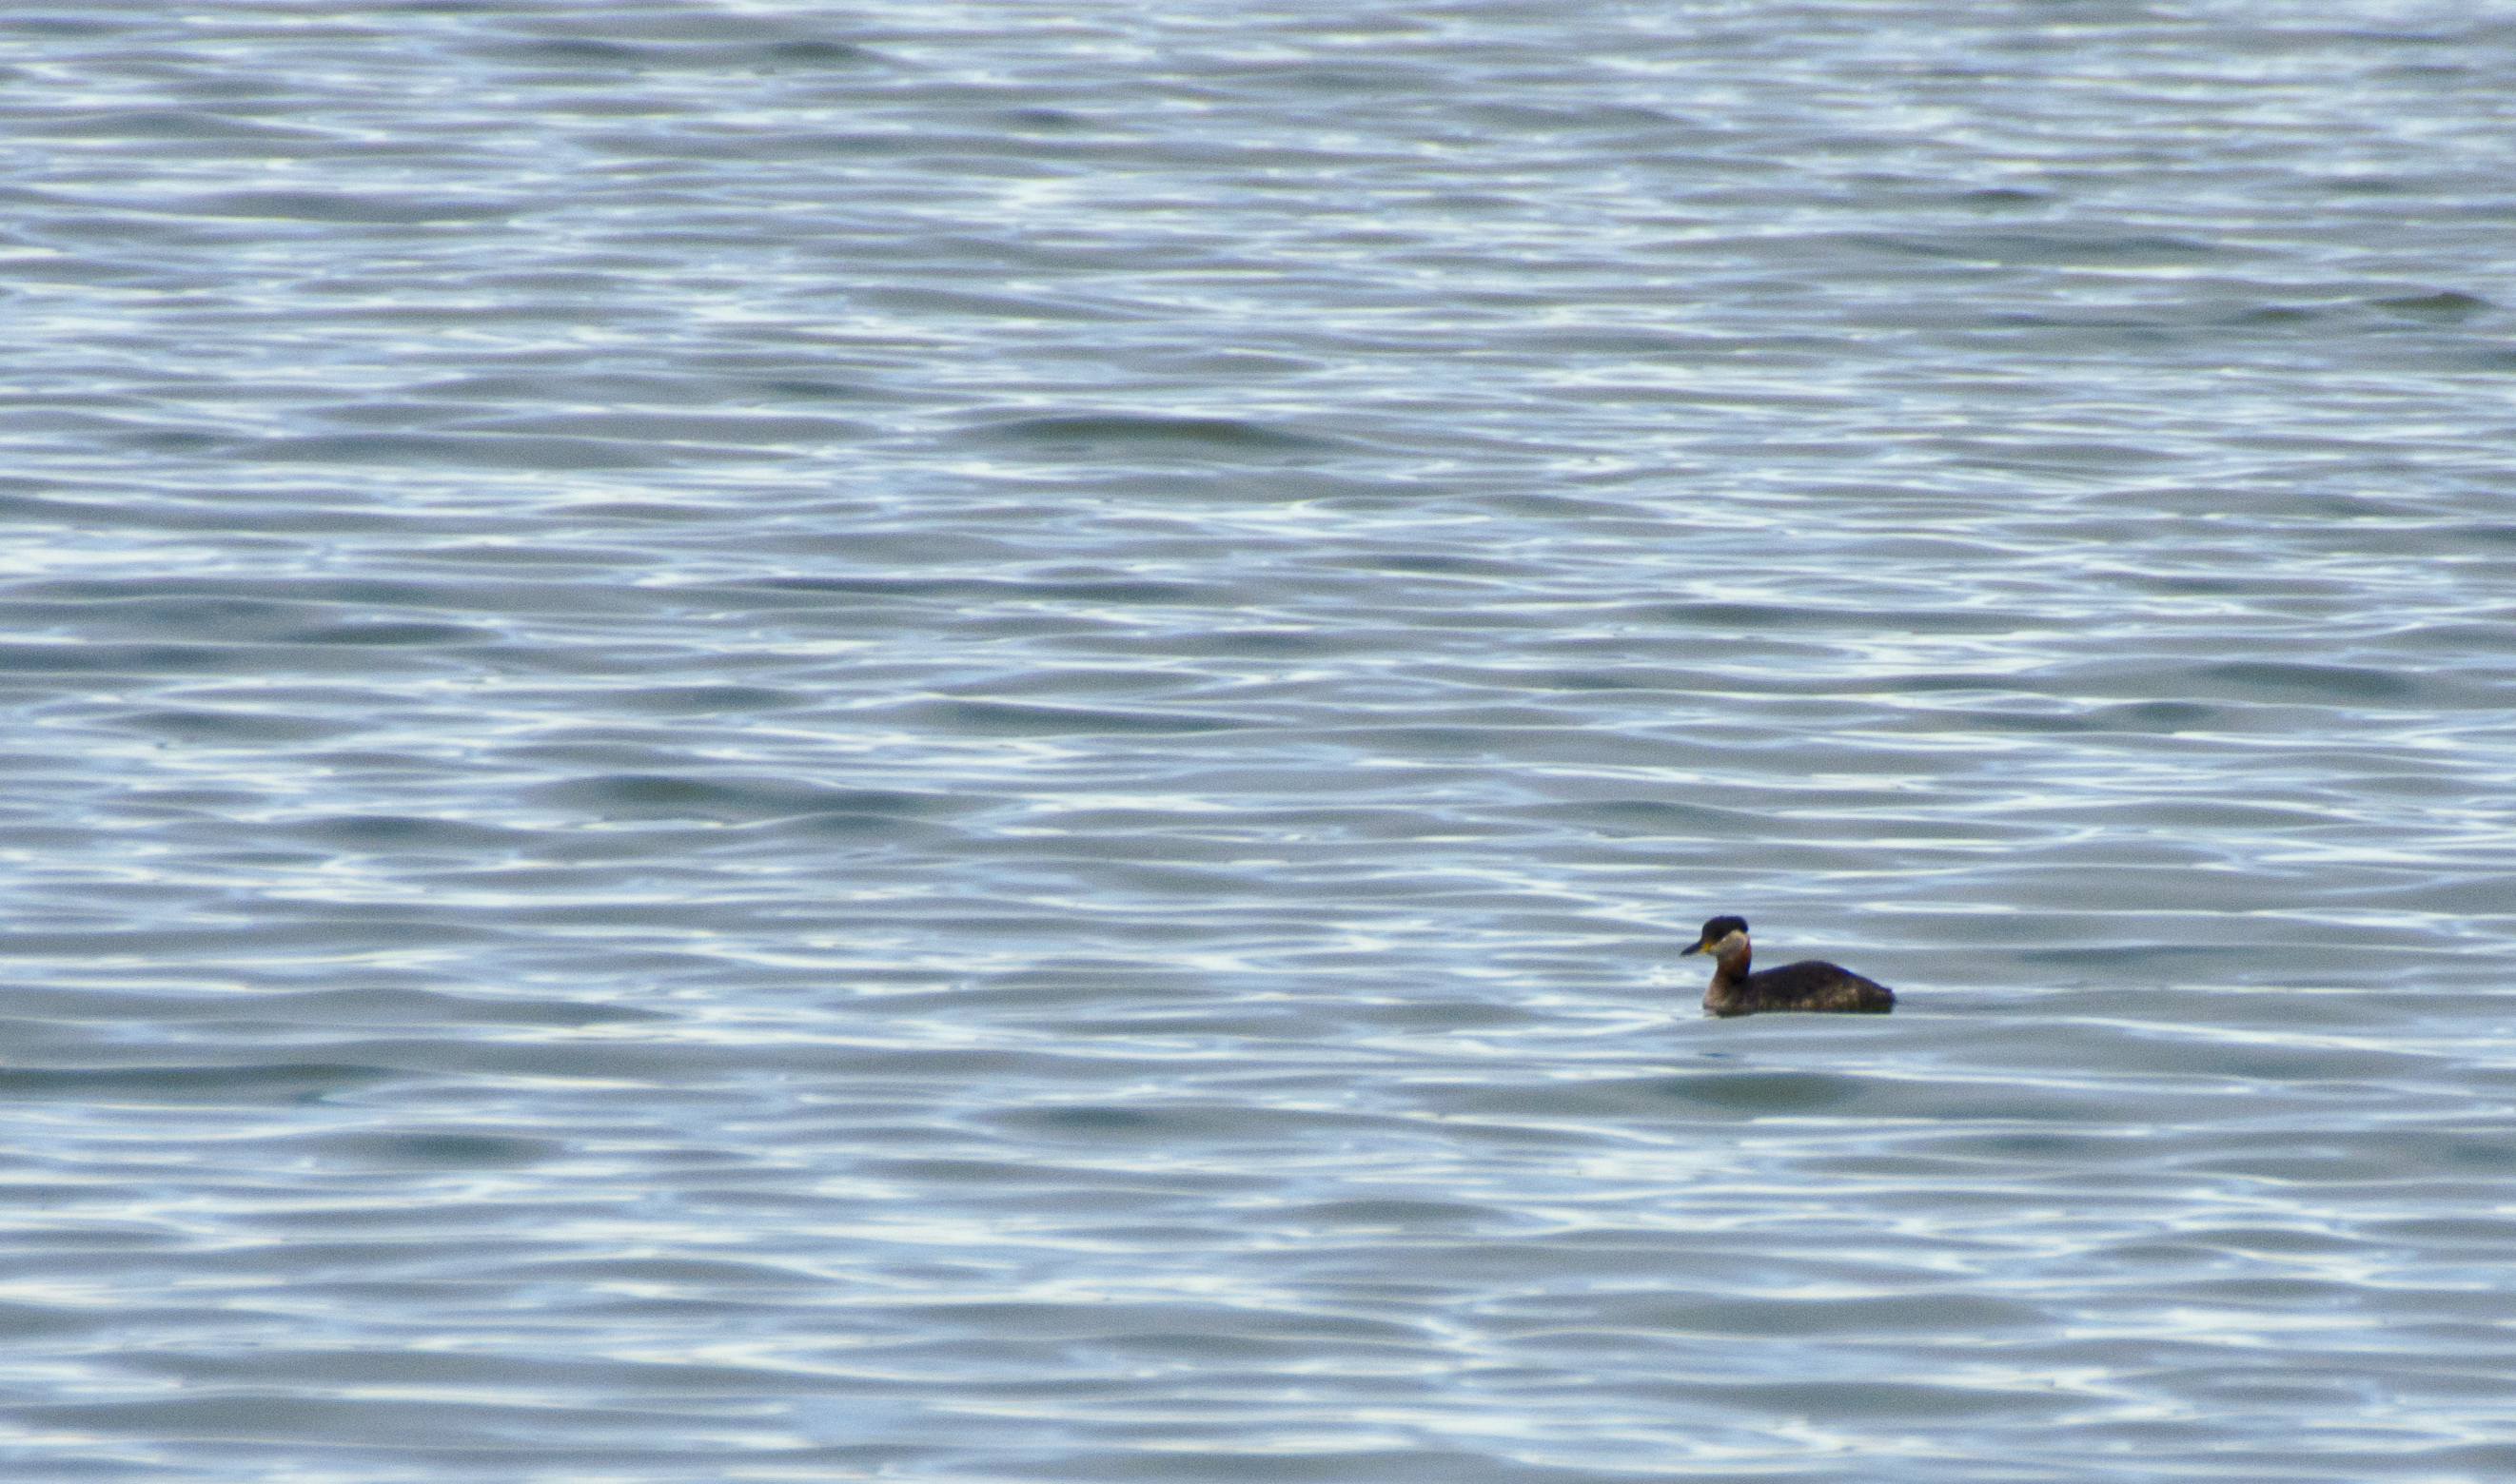 If you're a black-capped diving duck with a rusty colored neck, you might be a Red-neck...ed Grebe.